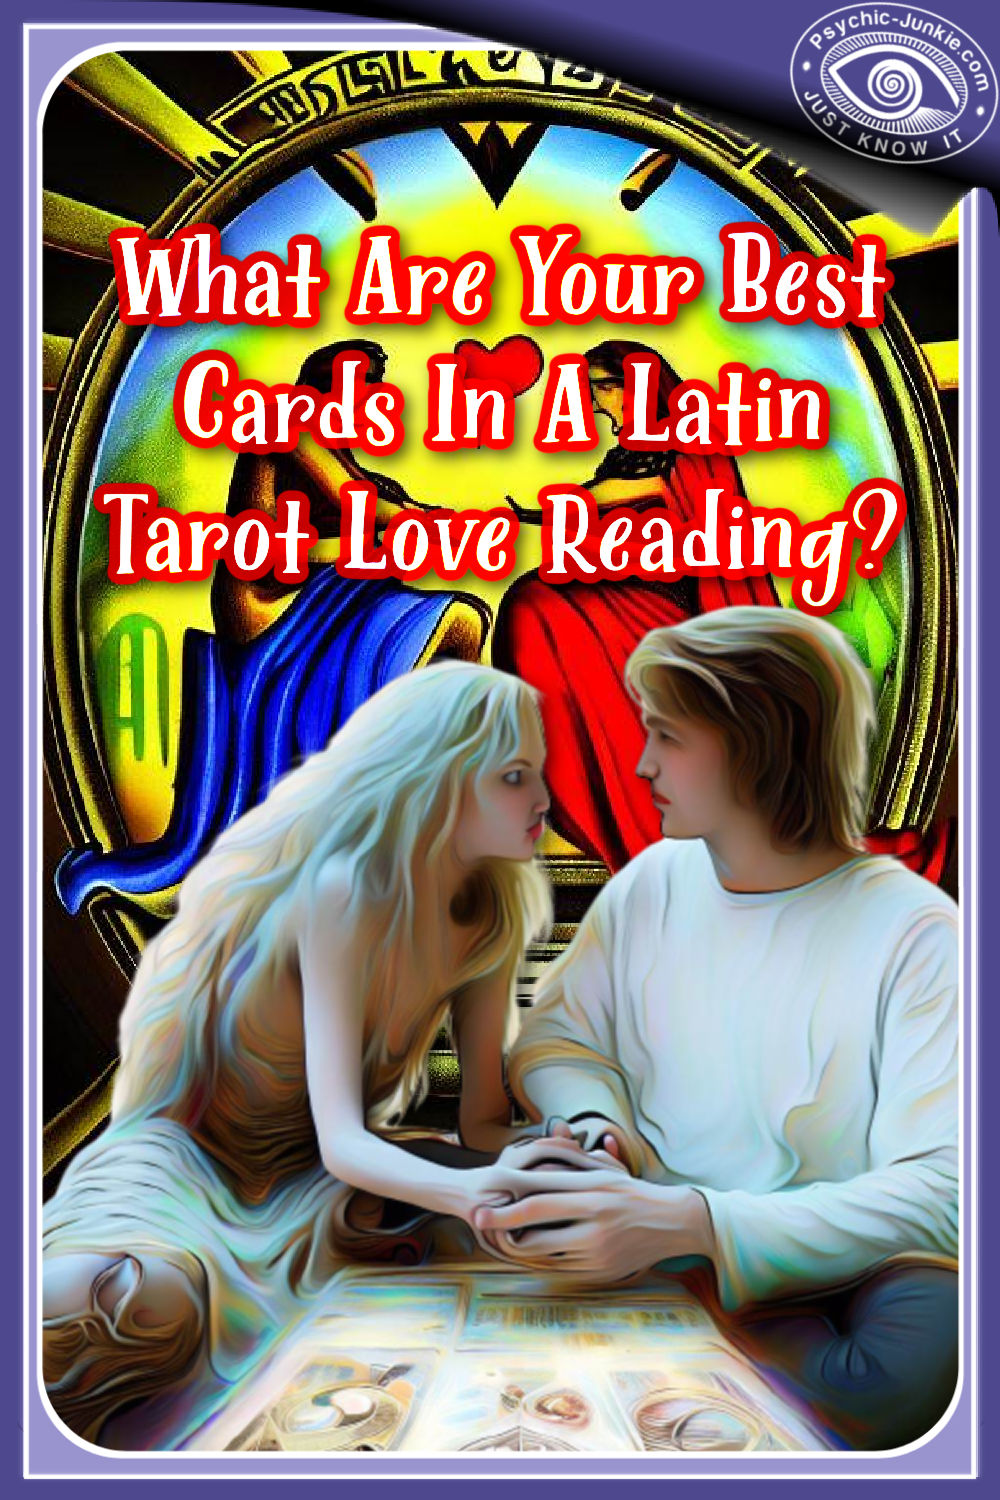 What Are Your Best Cards In A Latin Tarot Love Reading?